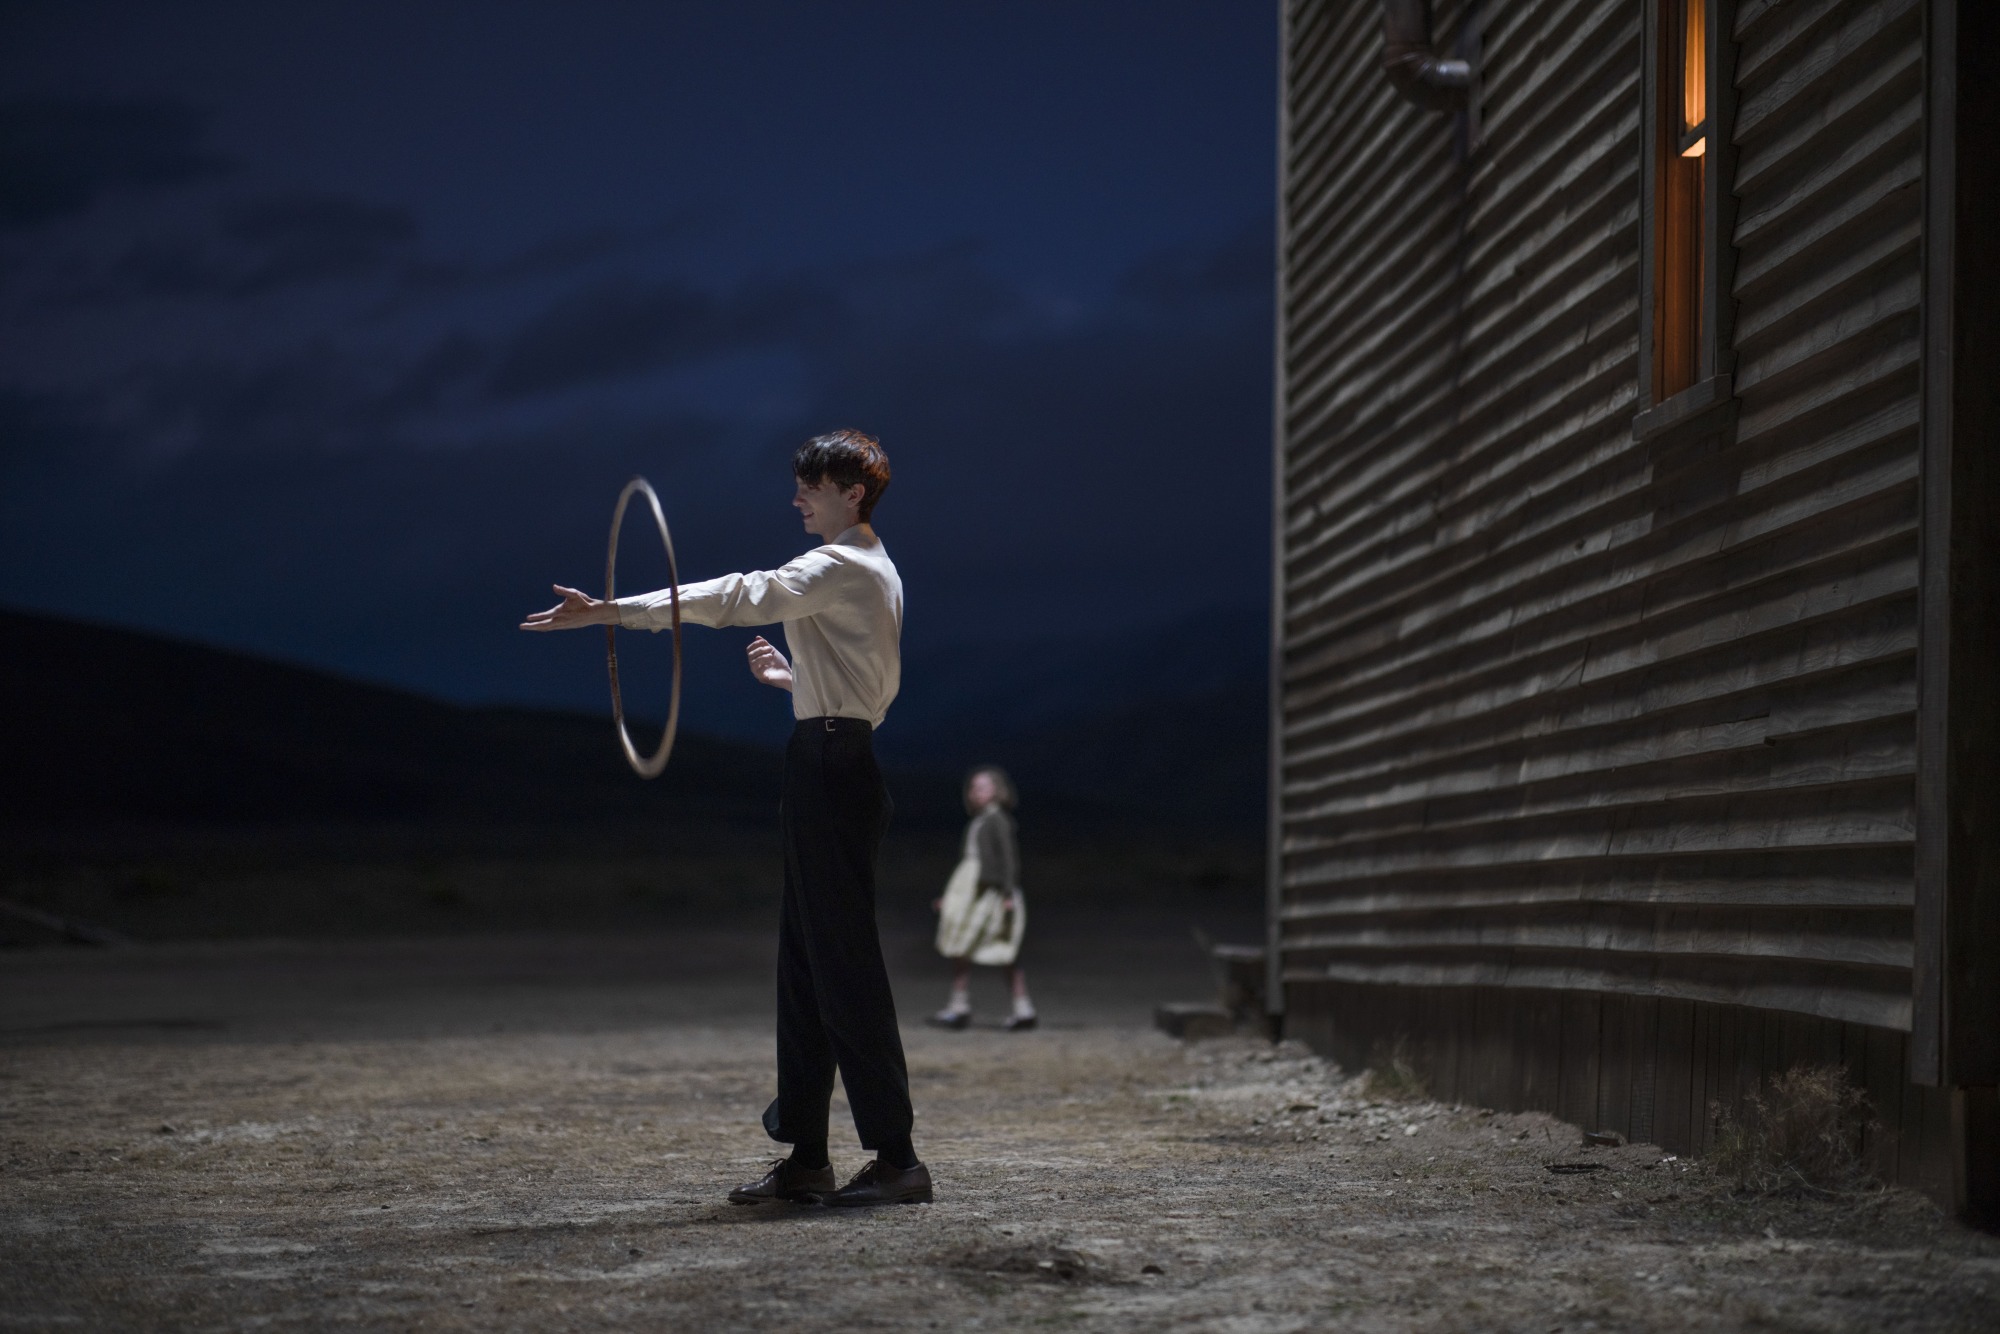 Kodi Smit-McPhee plays with a hula hoop in 'The Power of the Dog.'